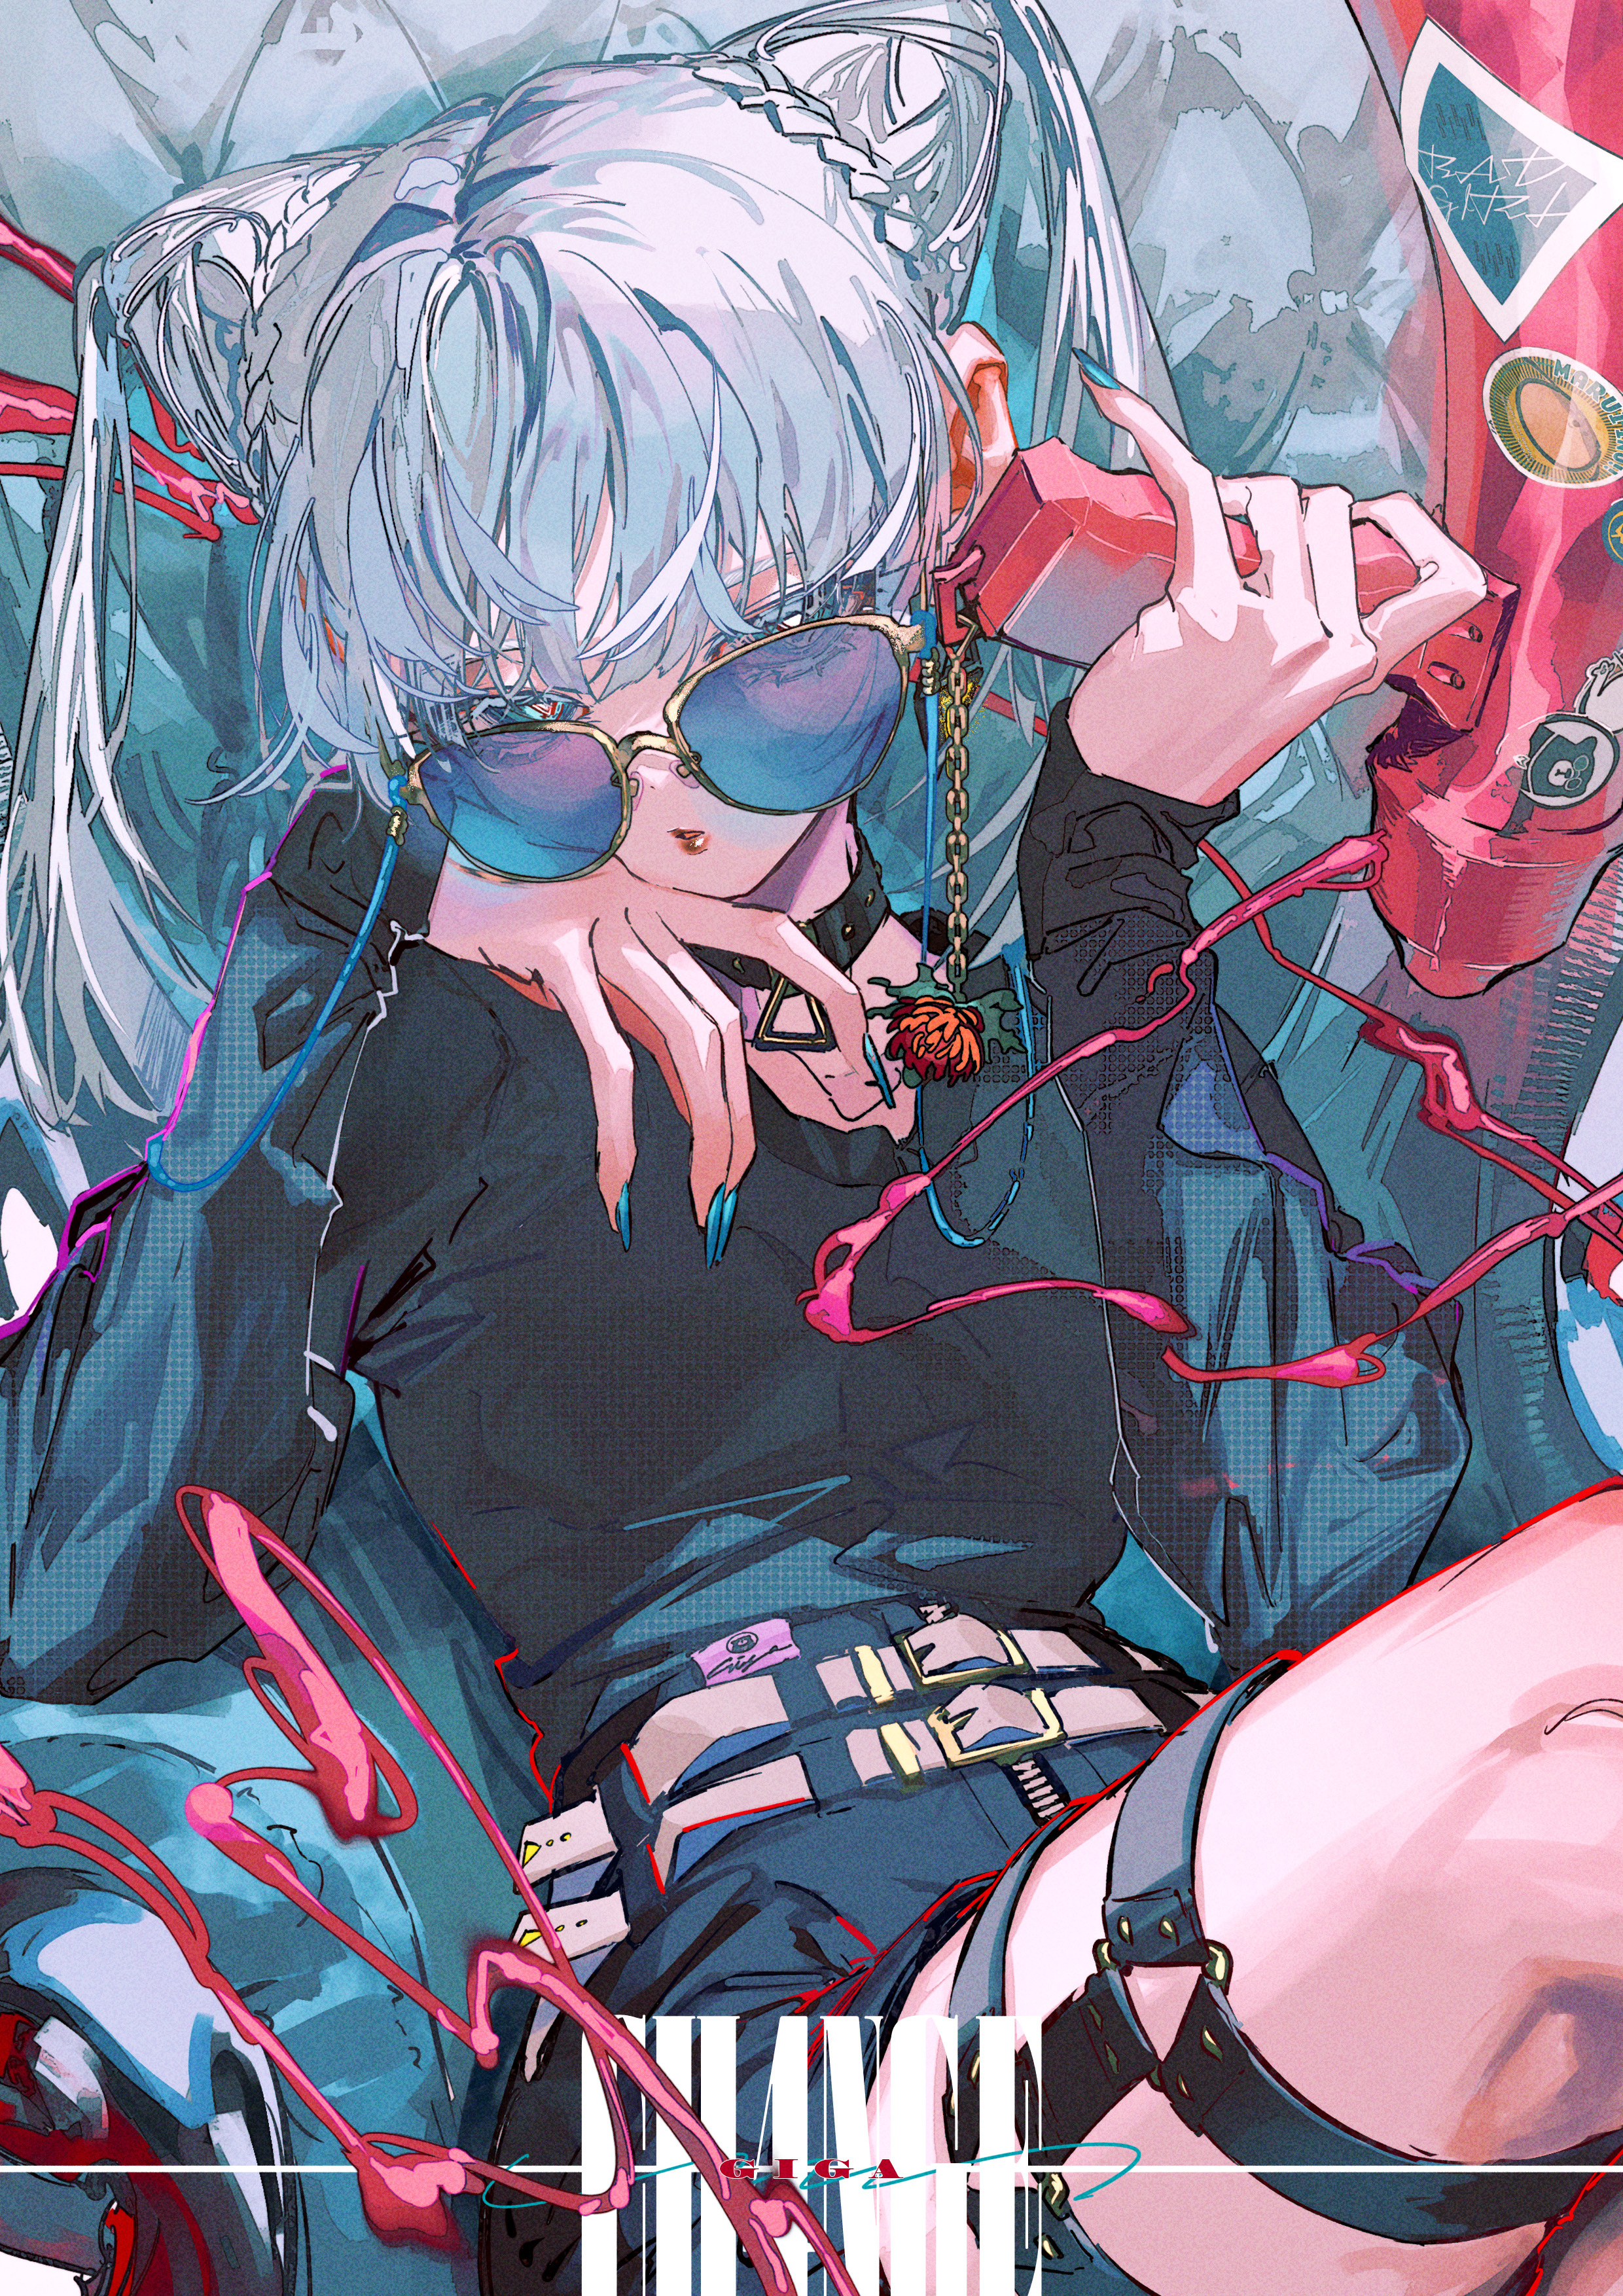 Anime 2480x3508 anime anime girls women with shades sunglasses blue nails painted nails women